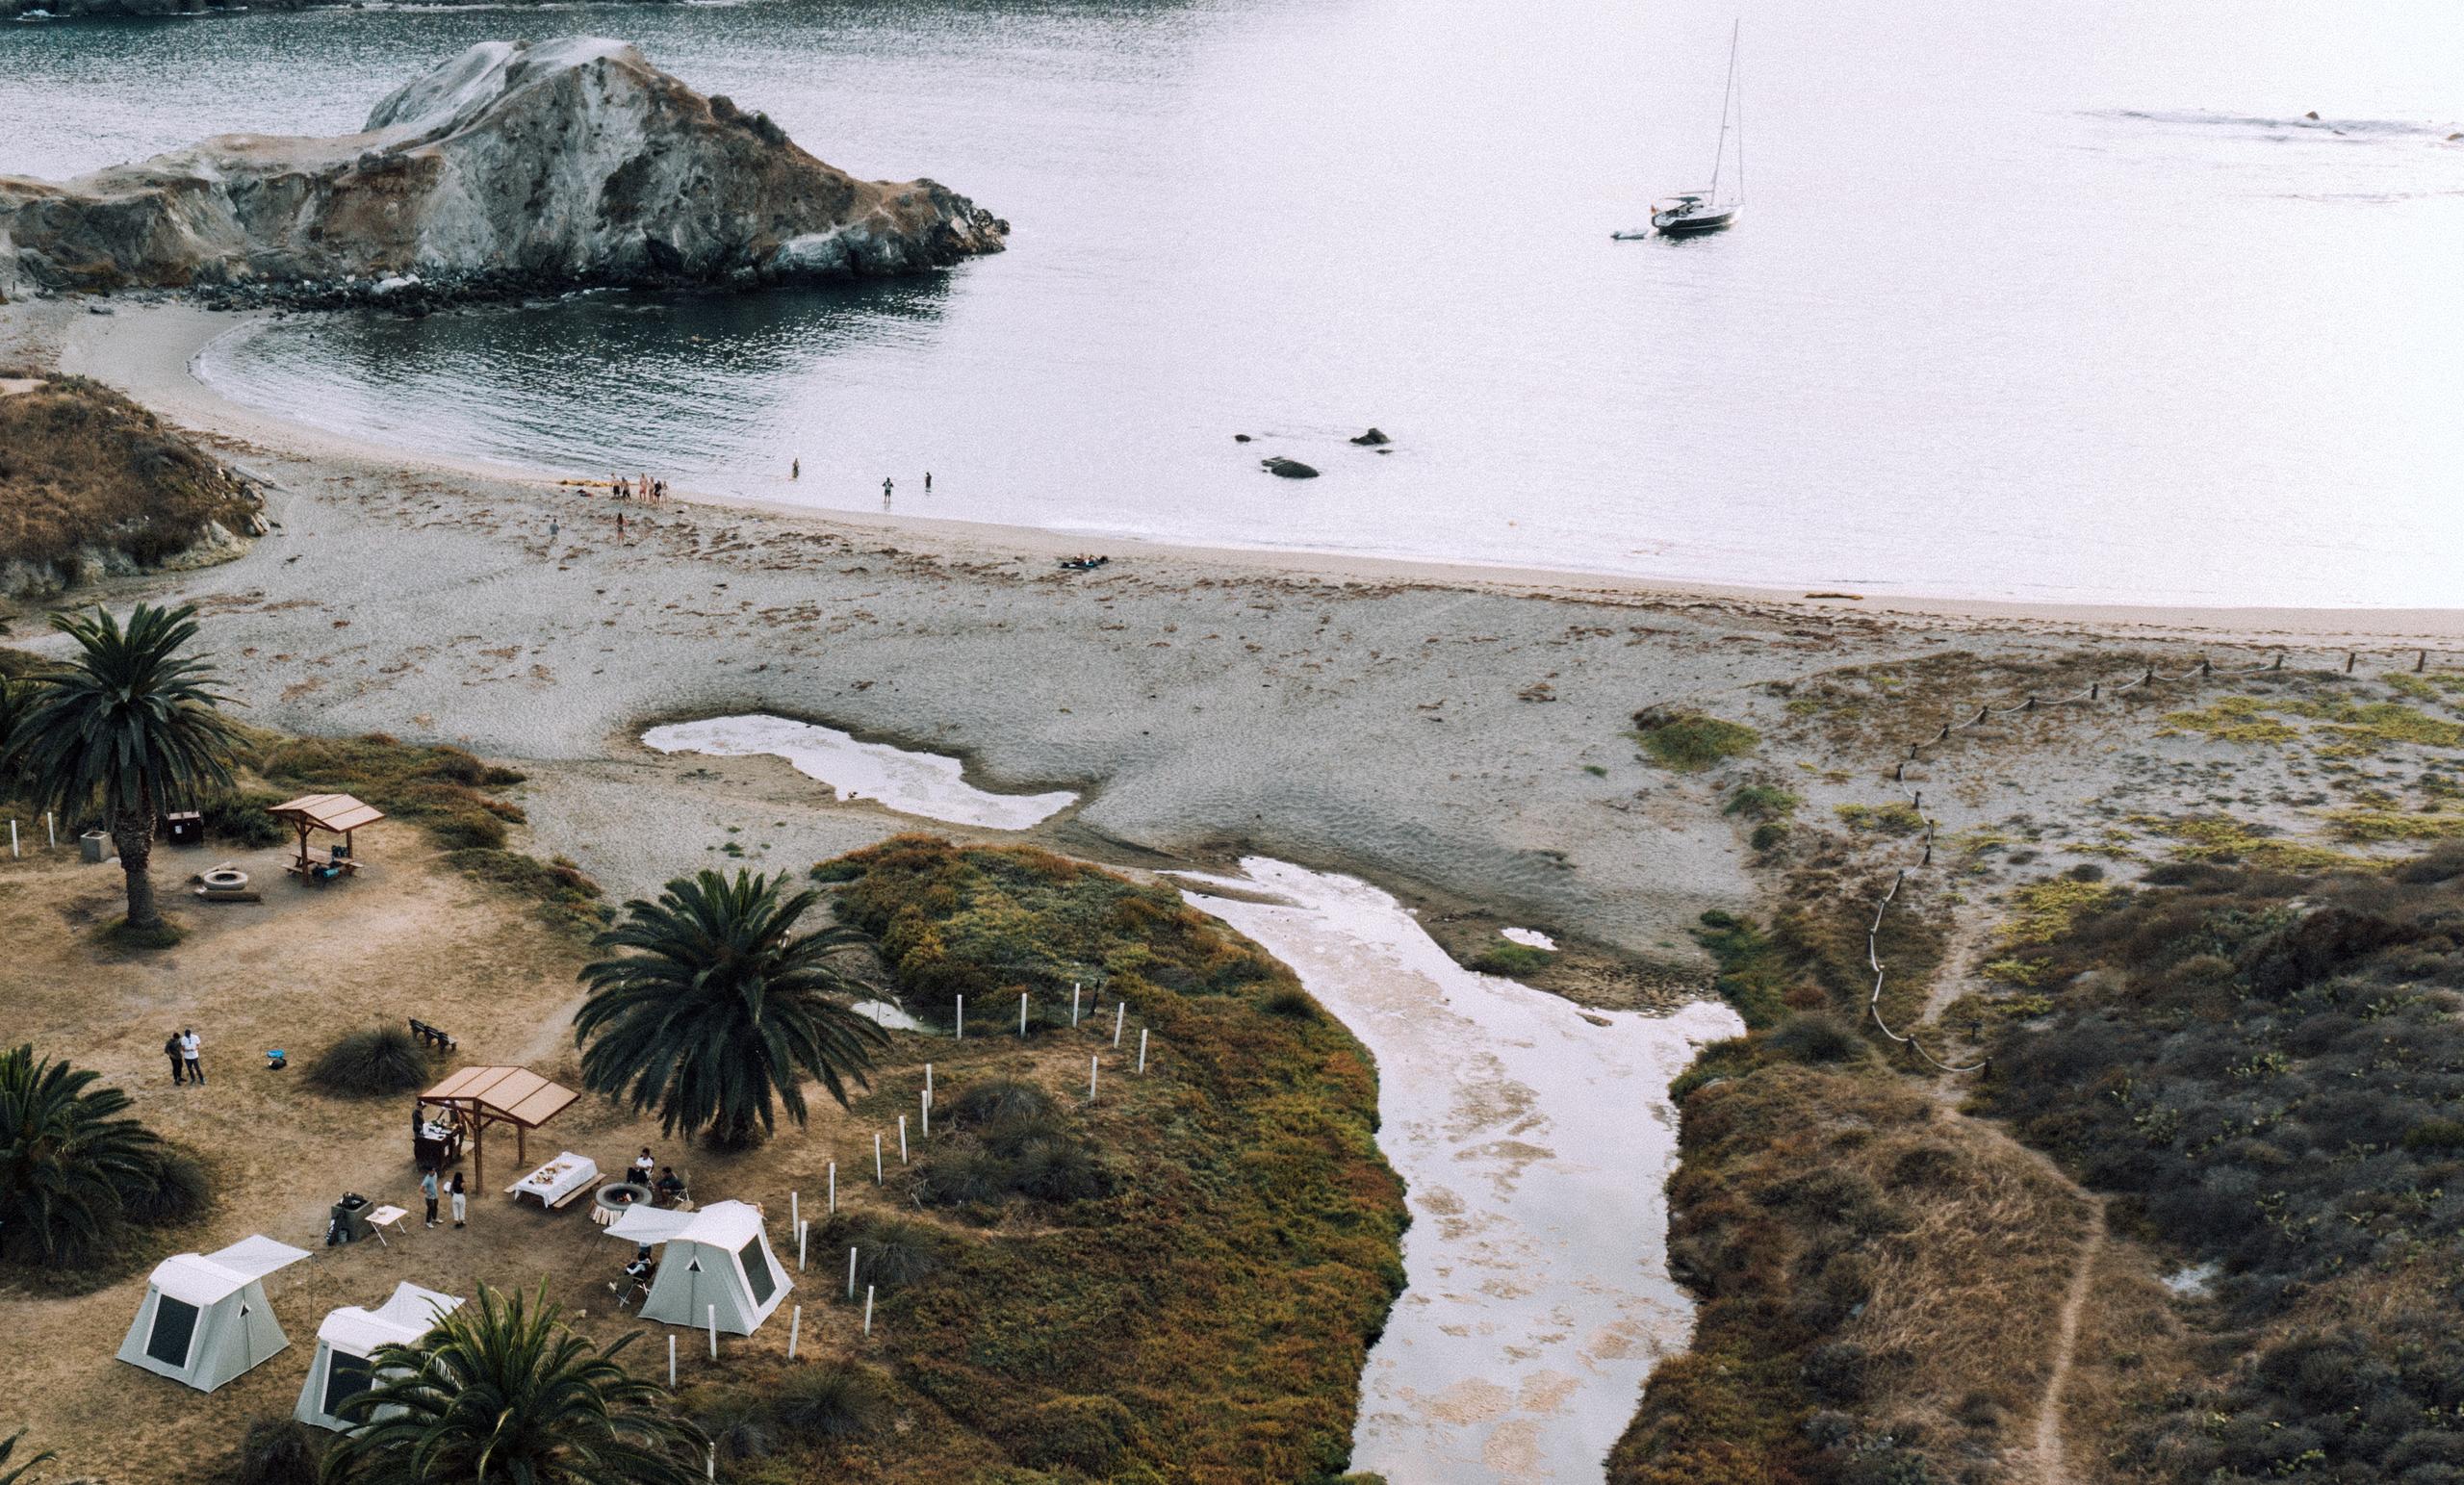 Aerial view of campsite on Catalina Island beach